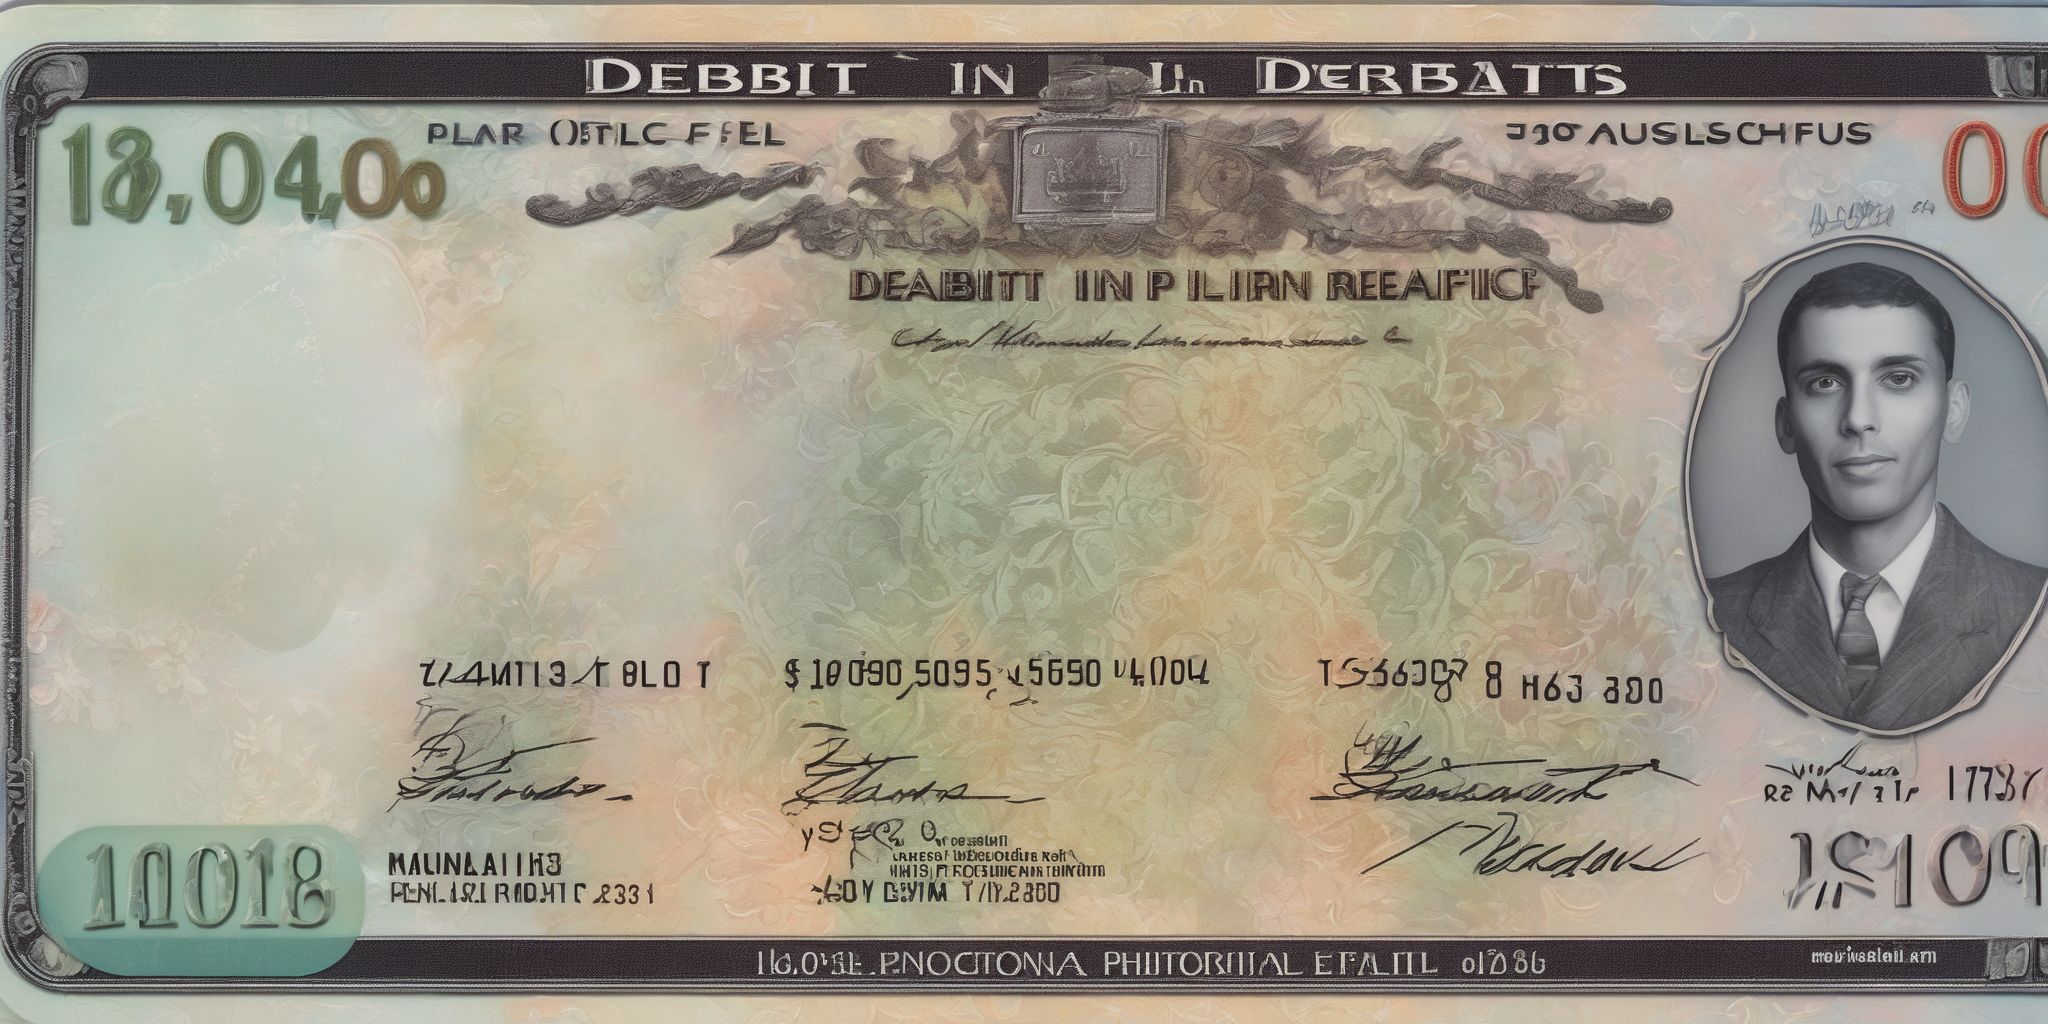 Debit  in realistic, photographic style